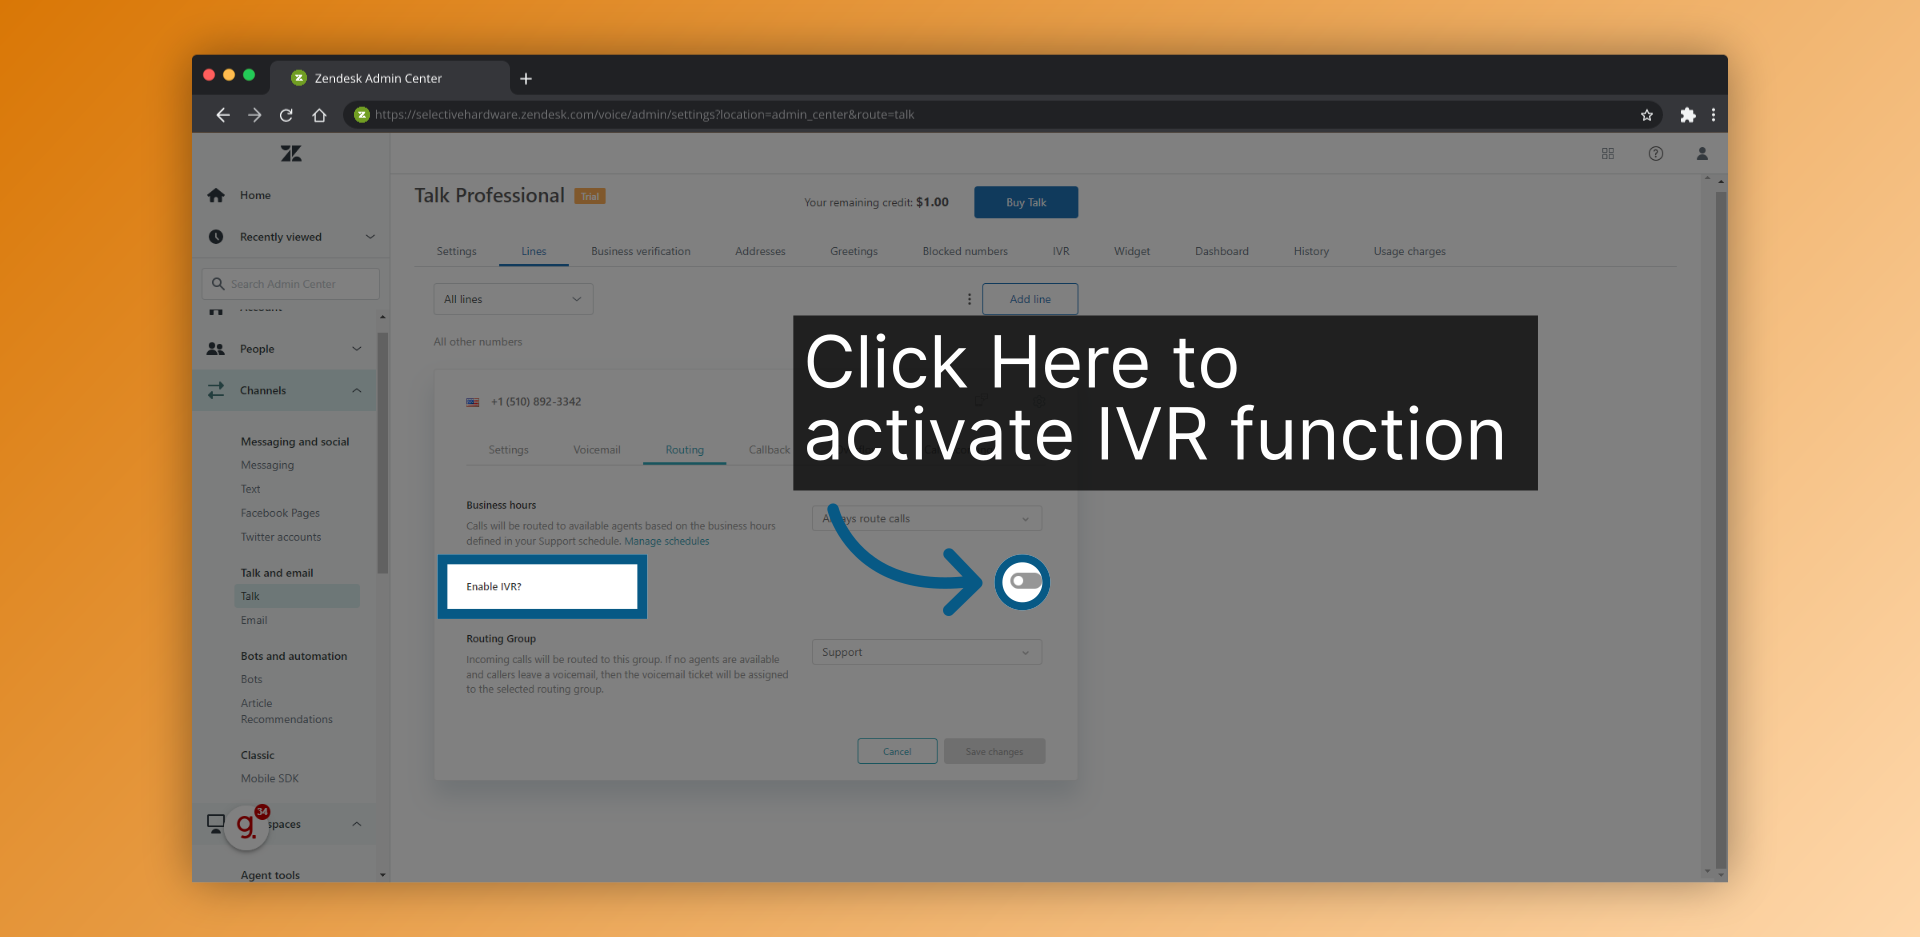 Click Here to activate IVR function